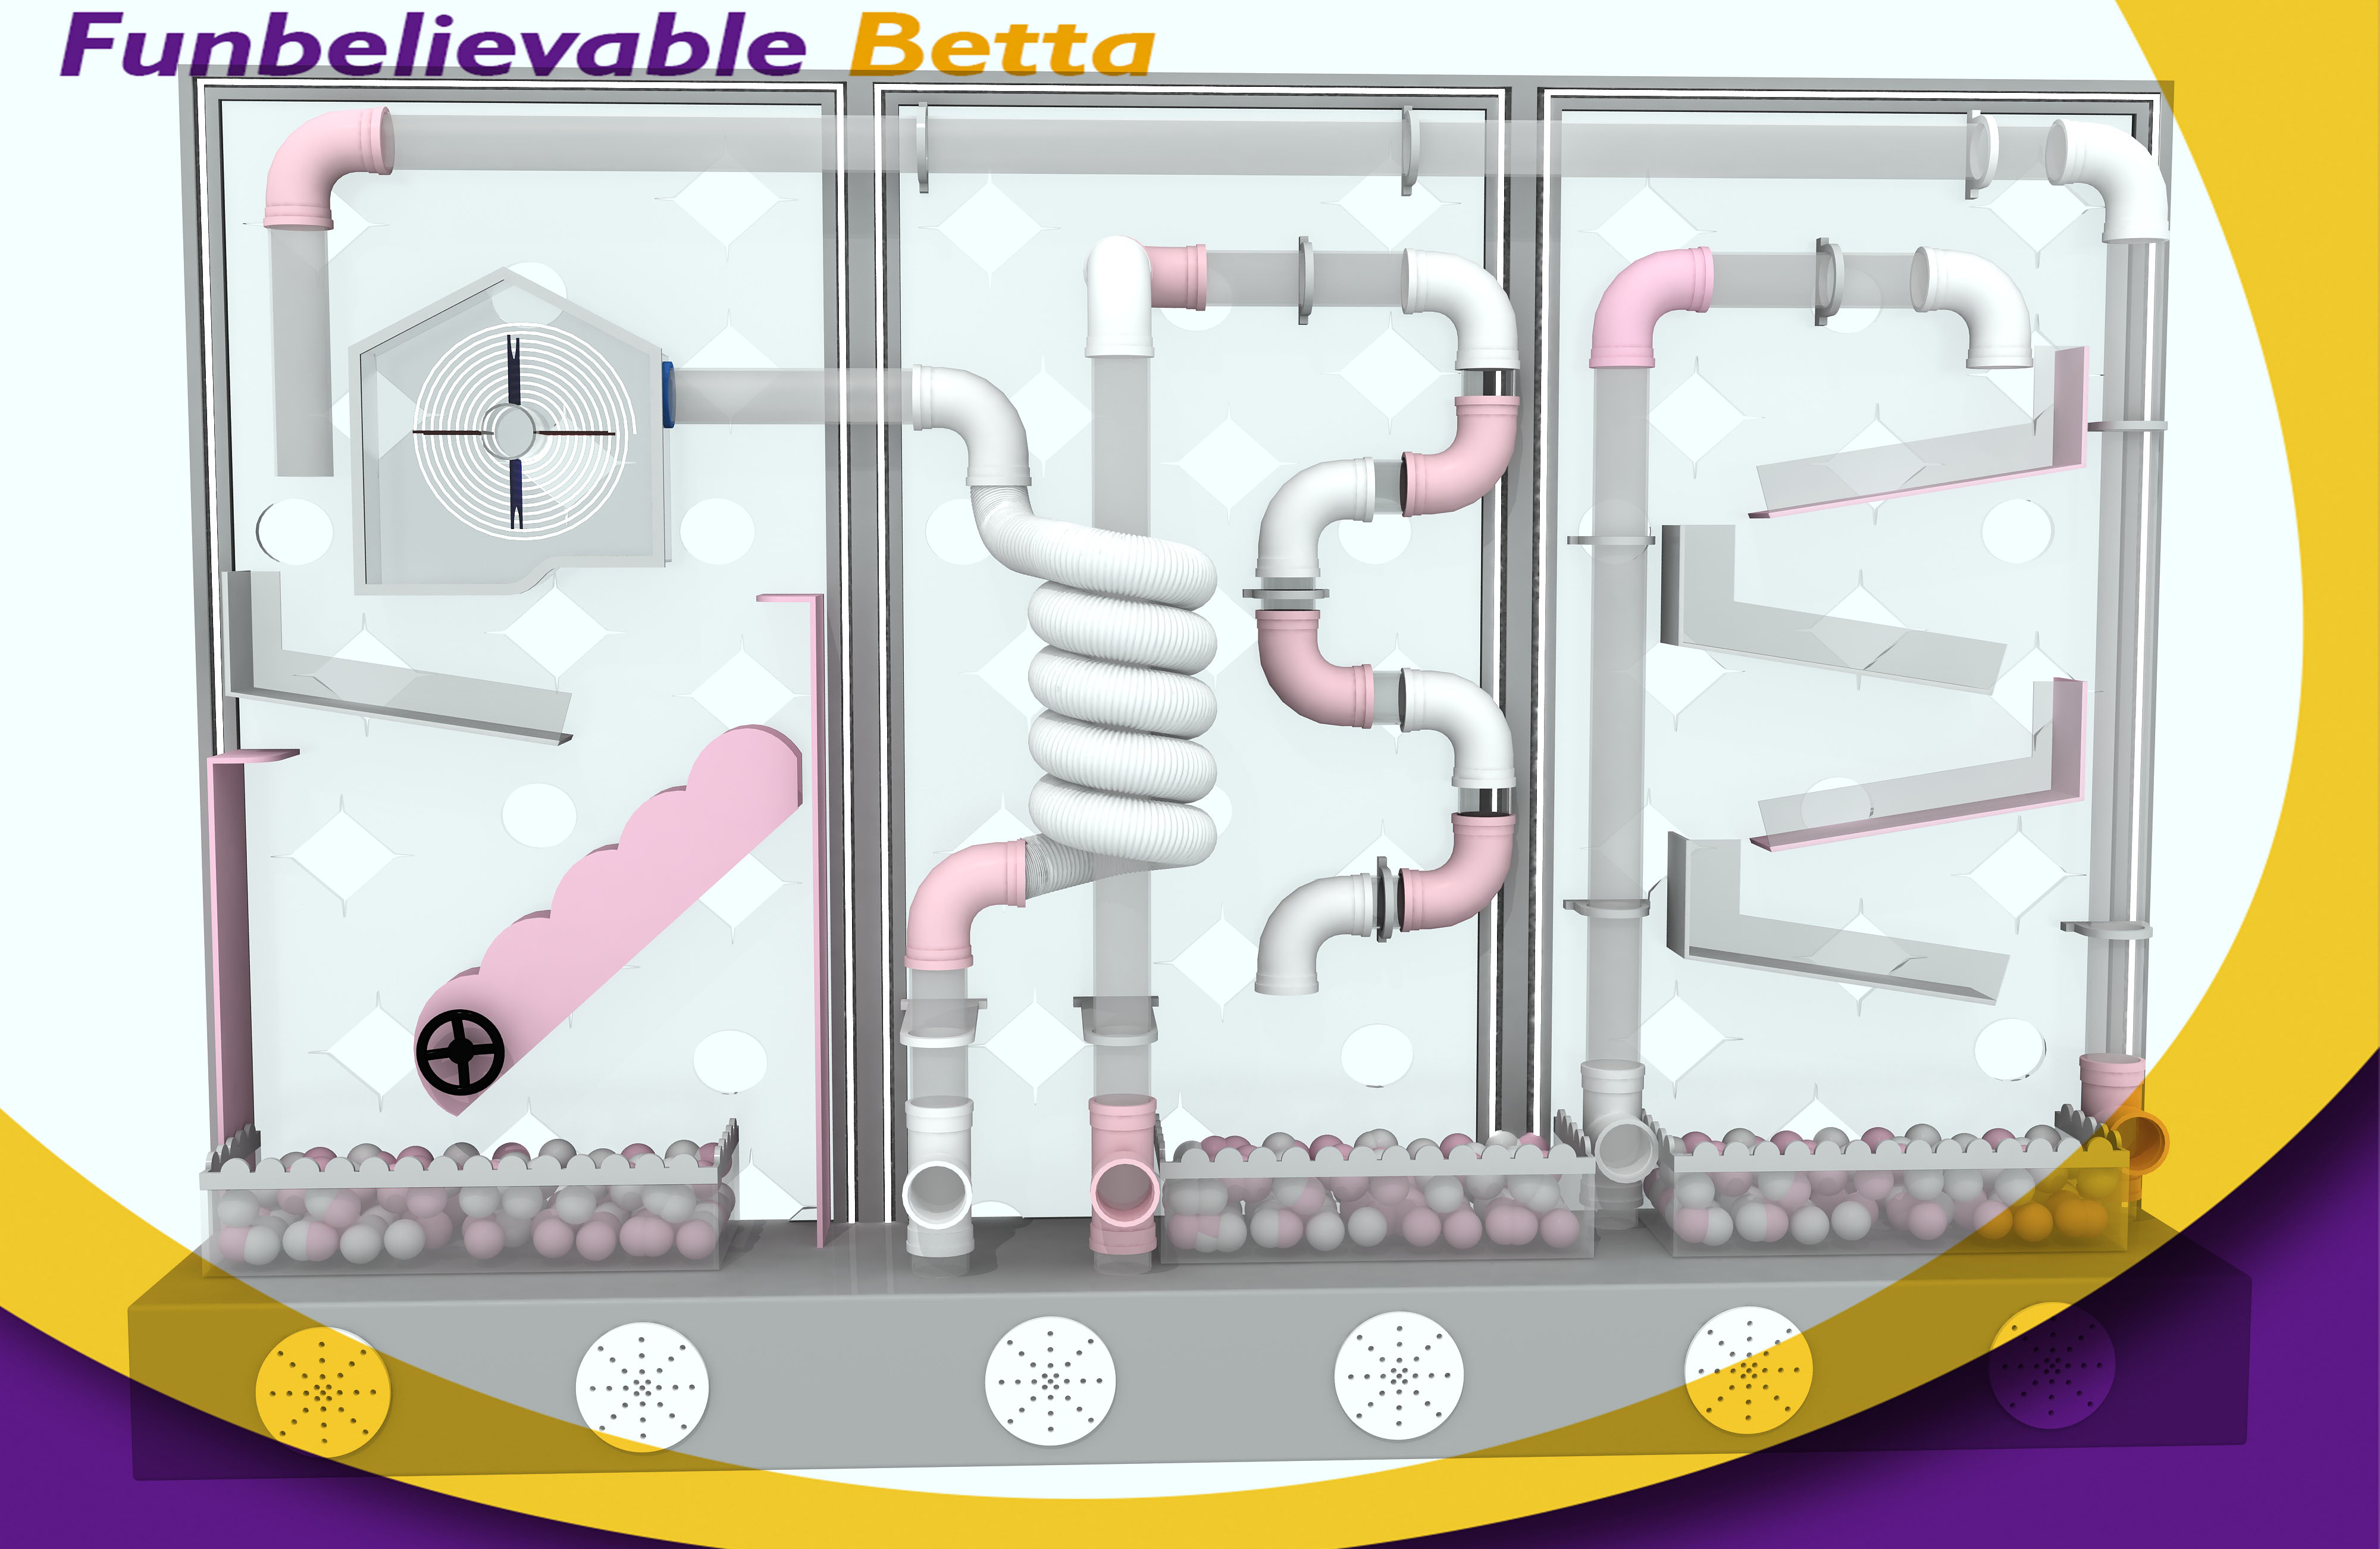 Bettaplay Interactive Science Wall Games for Kids Party Play